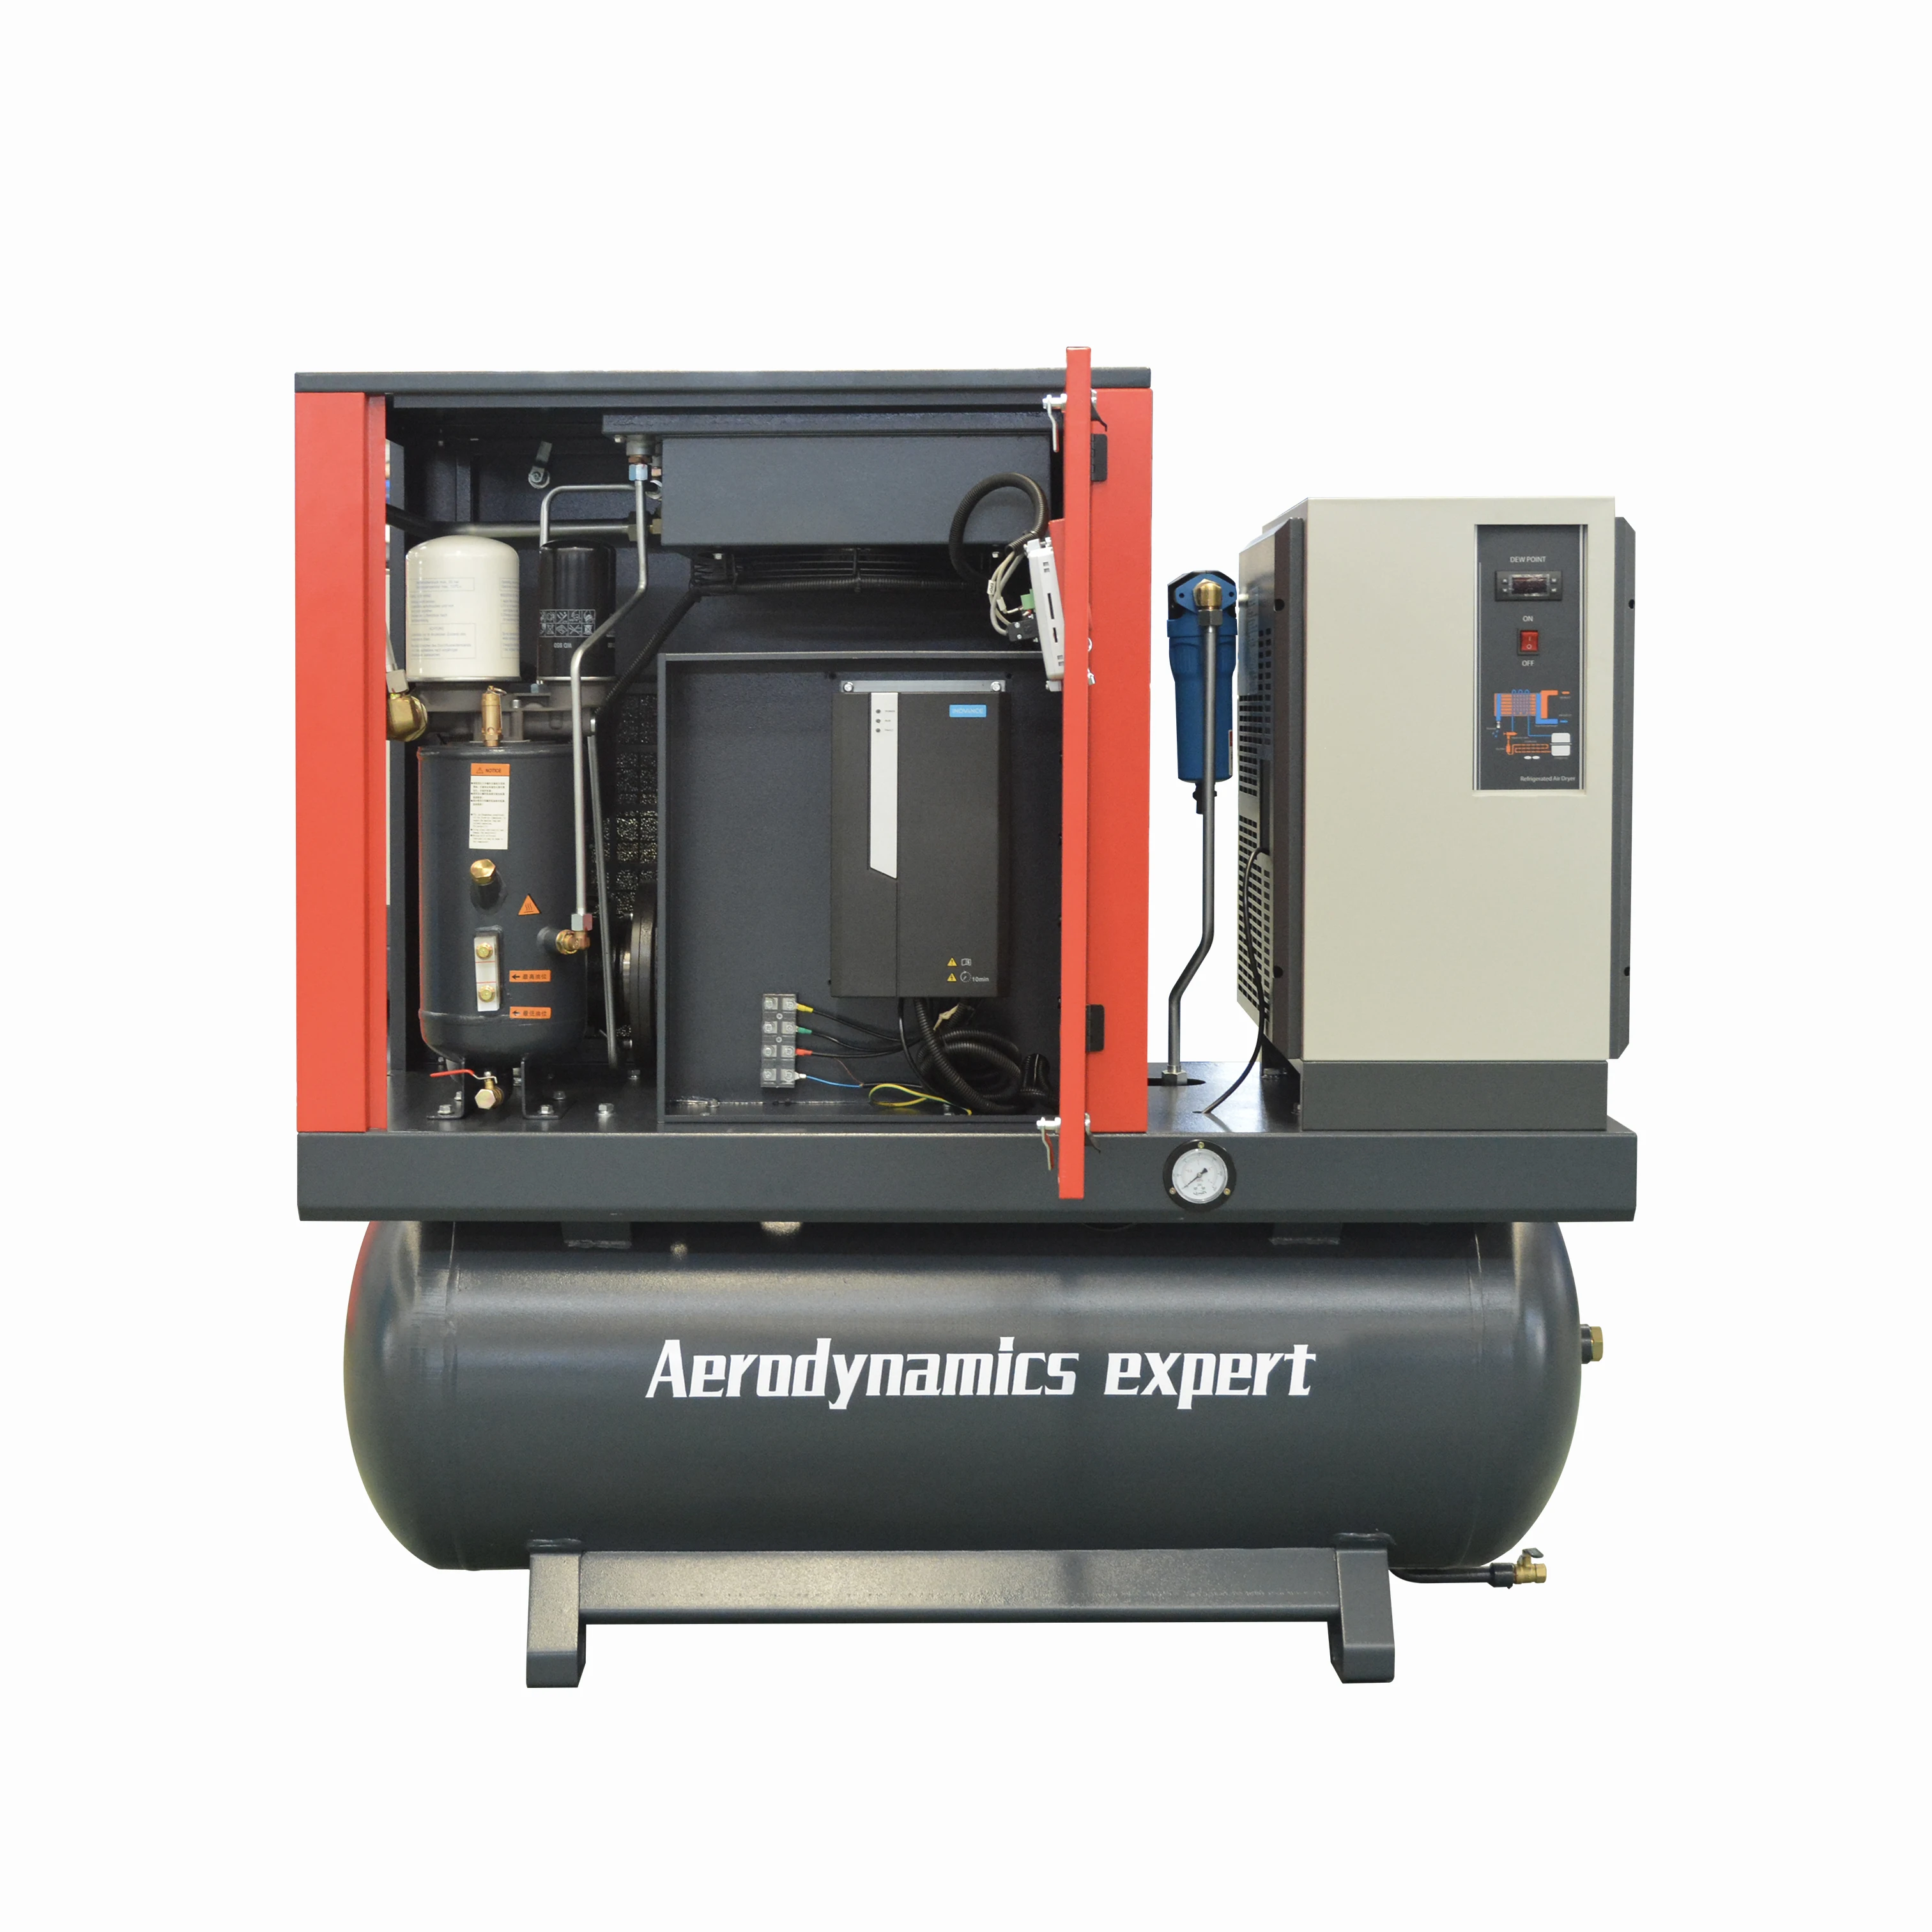 Ai rcompressors Industrial 16 Hp 15 Kw Combined Rotary Screw Air Compressor For Sandblasting Laser Cutting